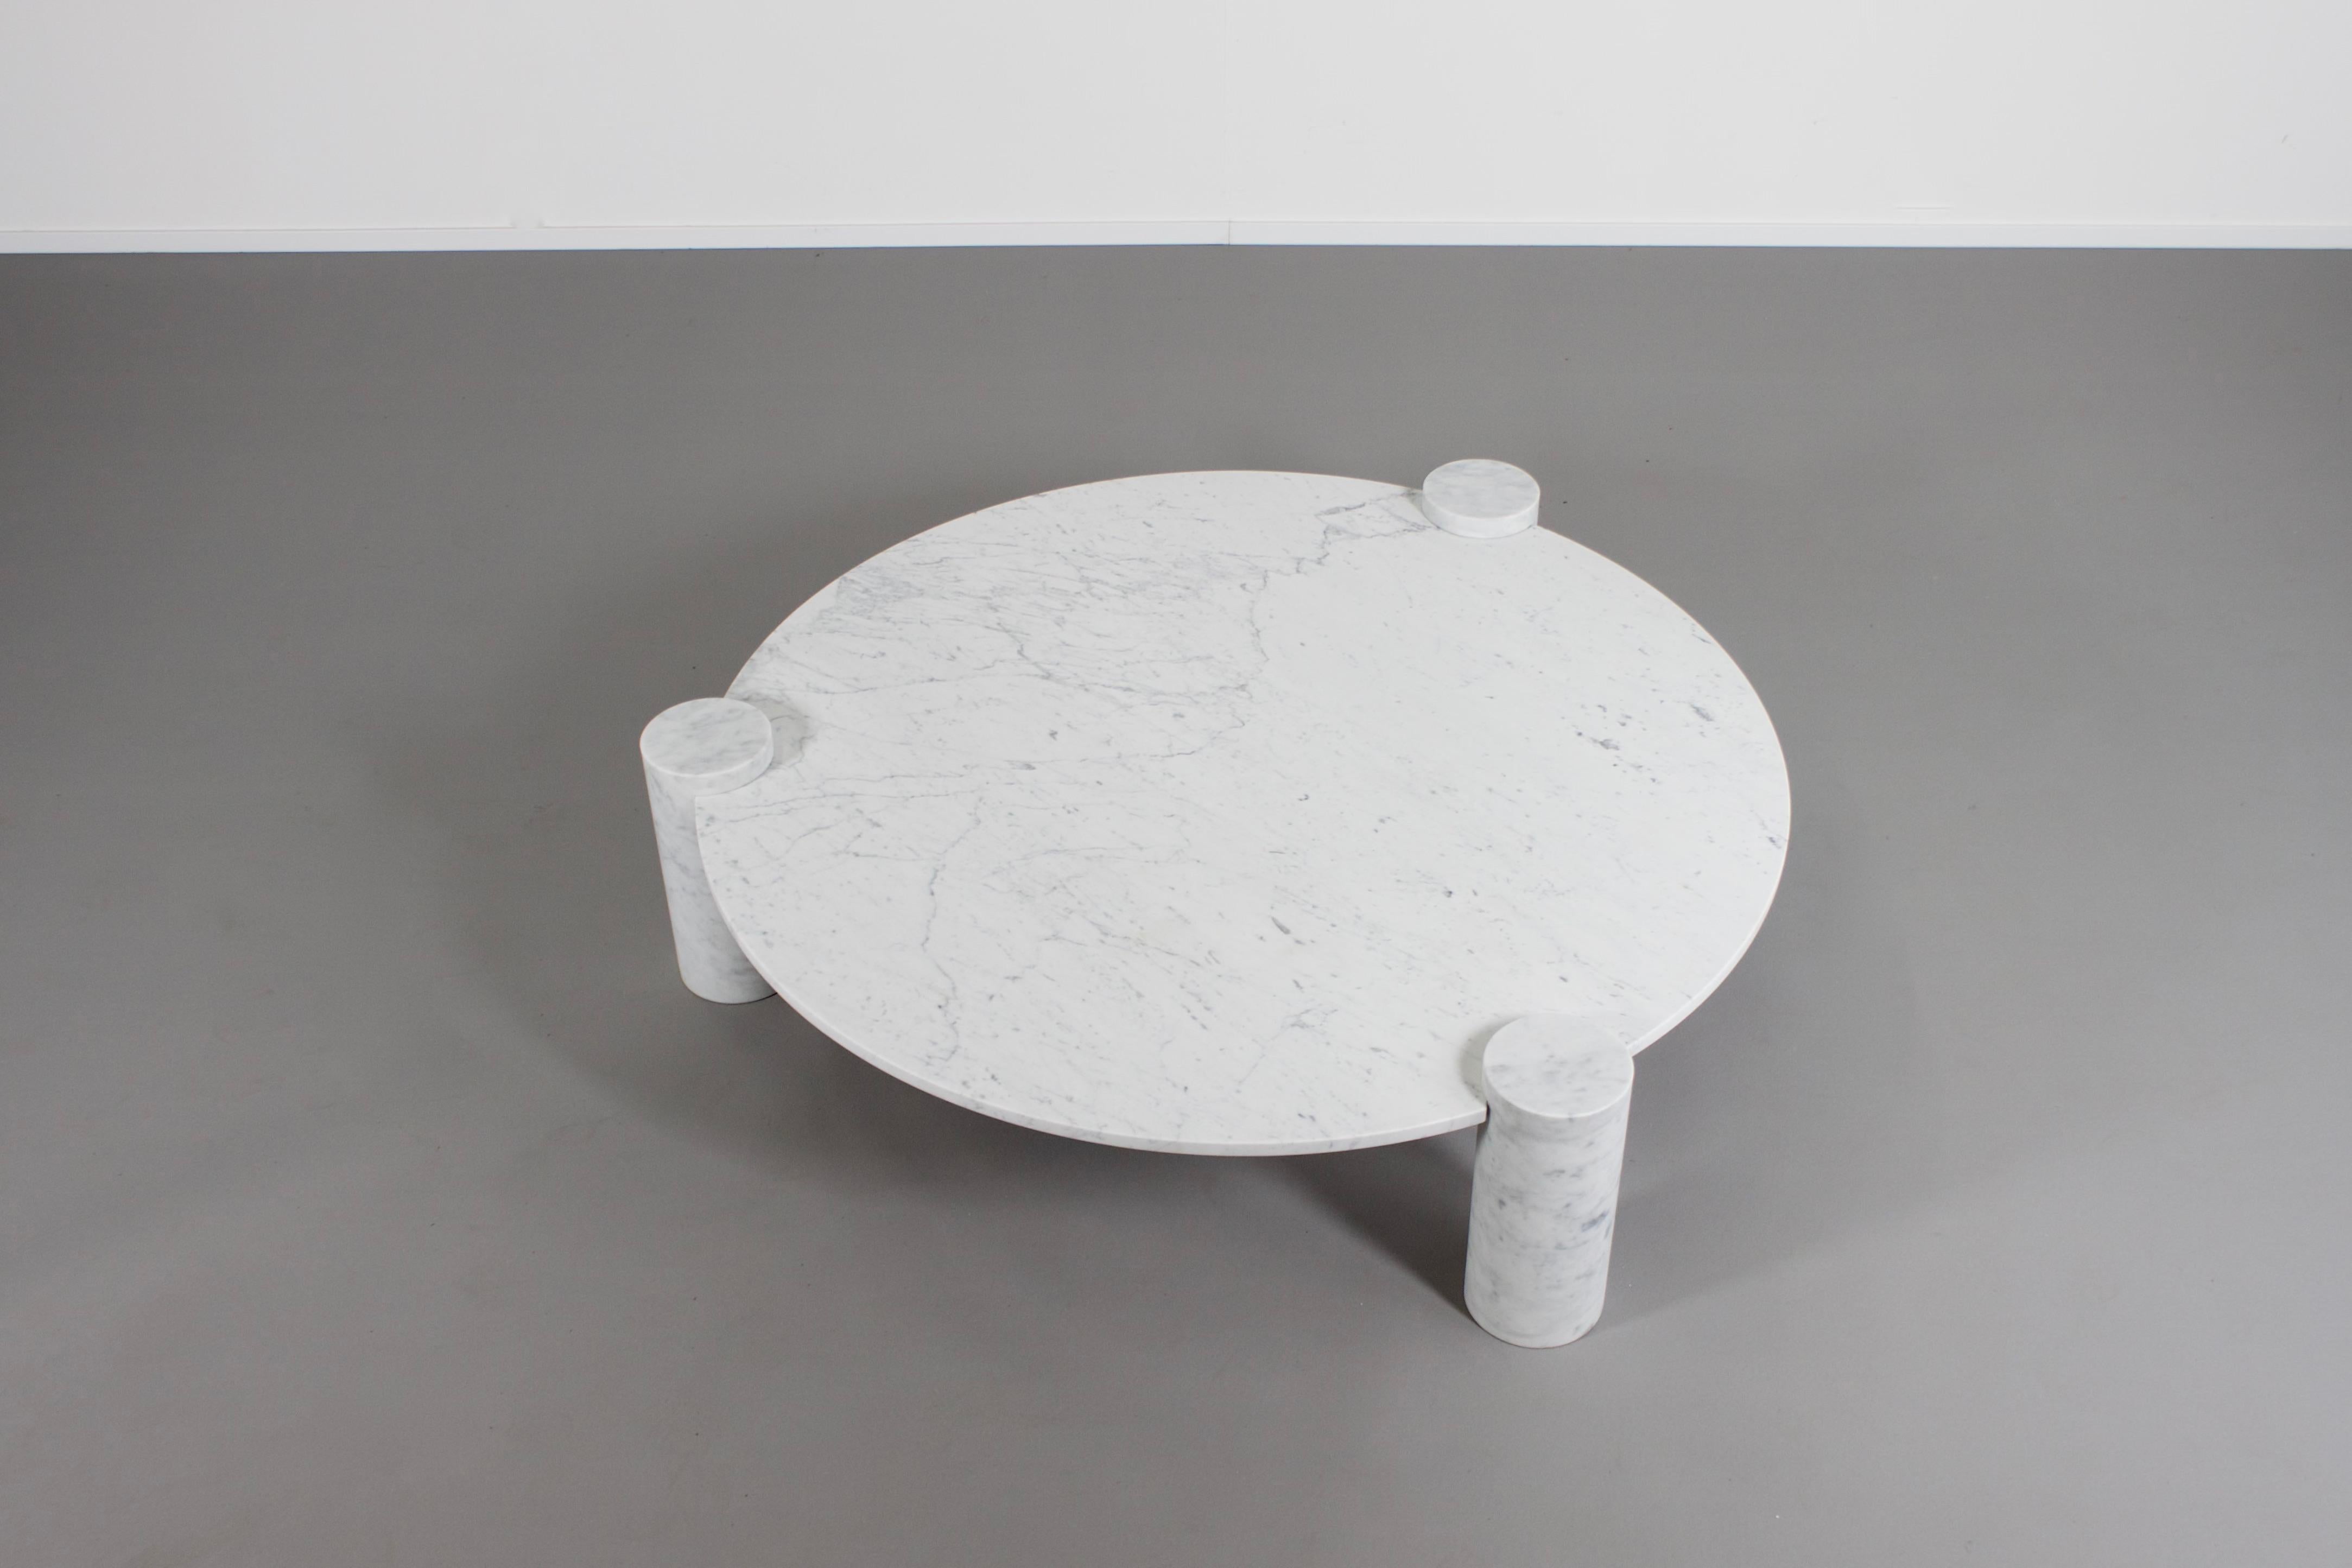 Fantastic round coffee table in excellent condition.

Made in Italy in the late 1970s

This particular table consists of a white Carrara marble top and round Carrara marble bases.

The three round solid marble bases have a slot which fits into the